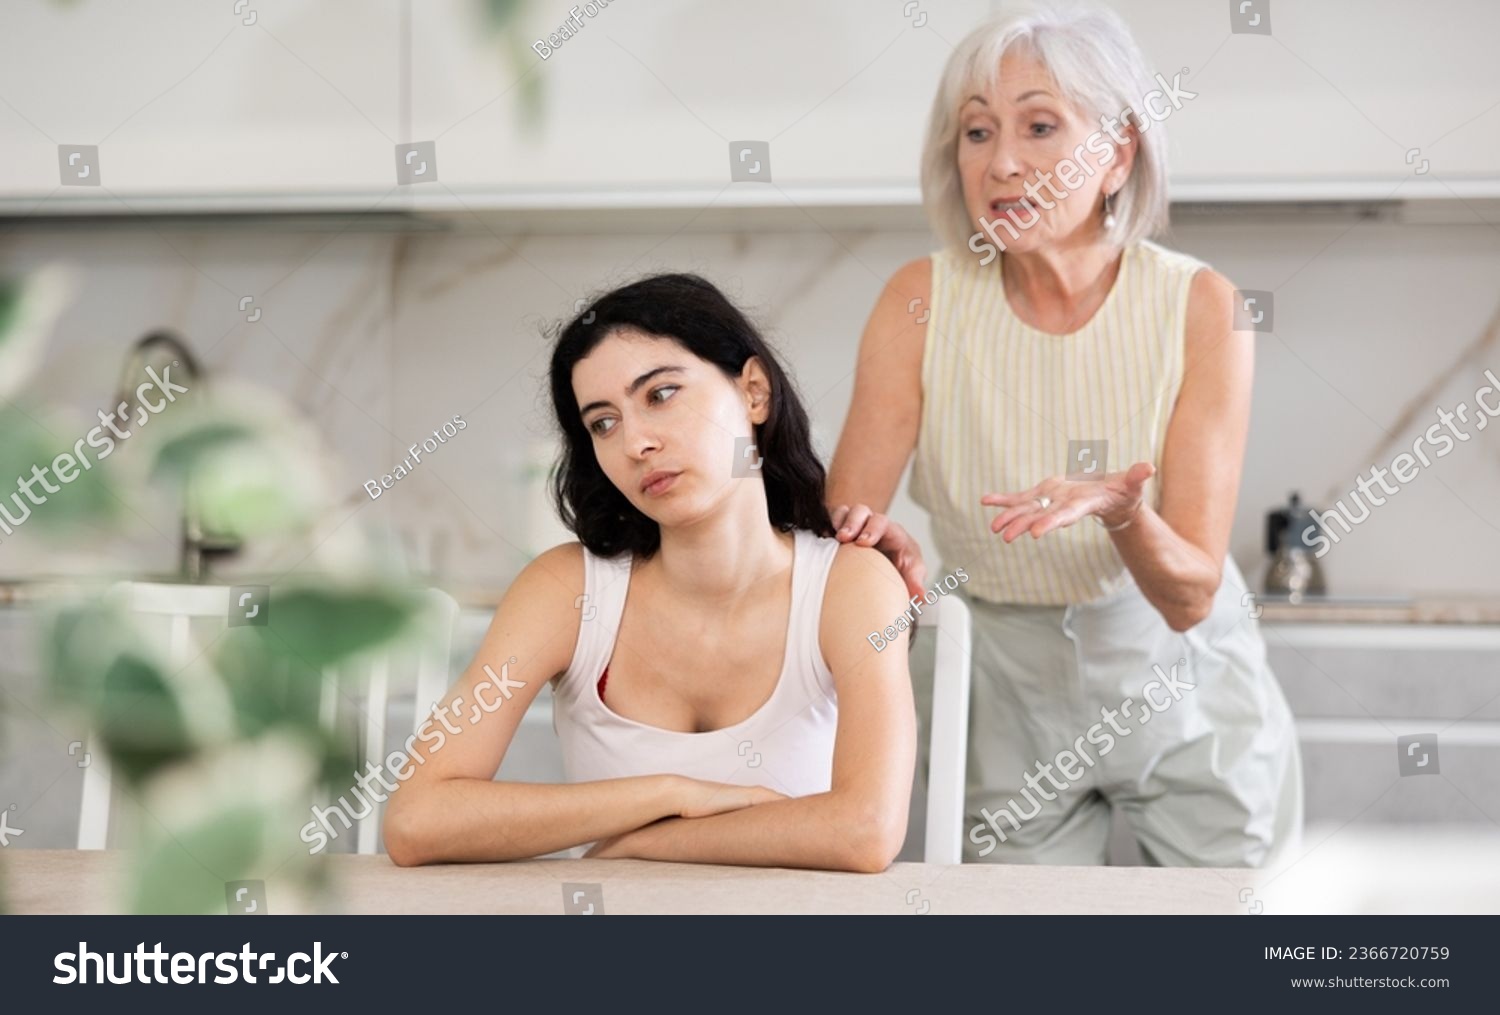 Elderly woman during family quarrel with young woman in kitchen at home #2366720759